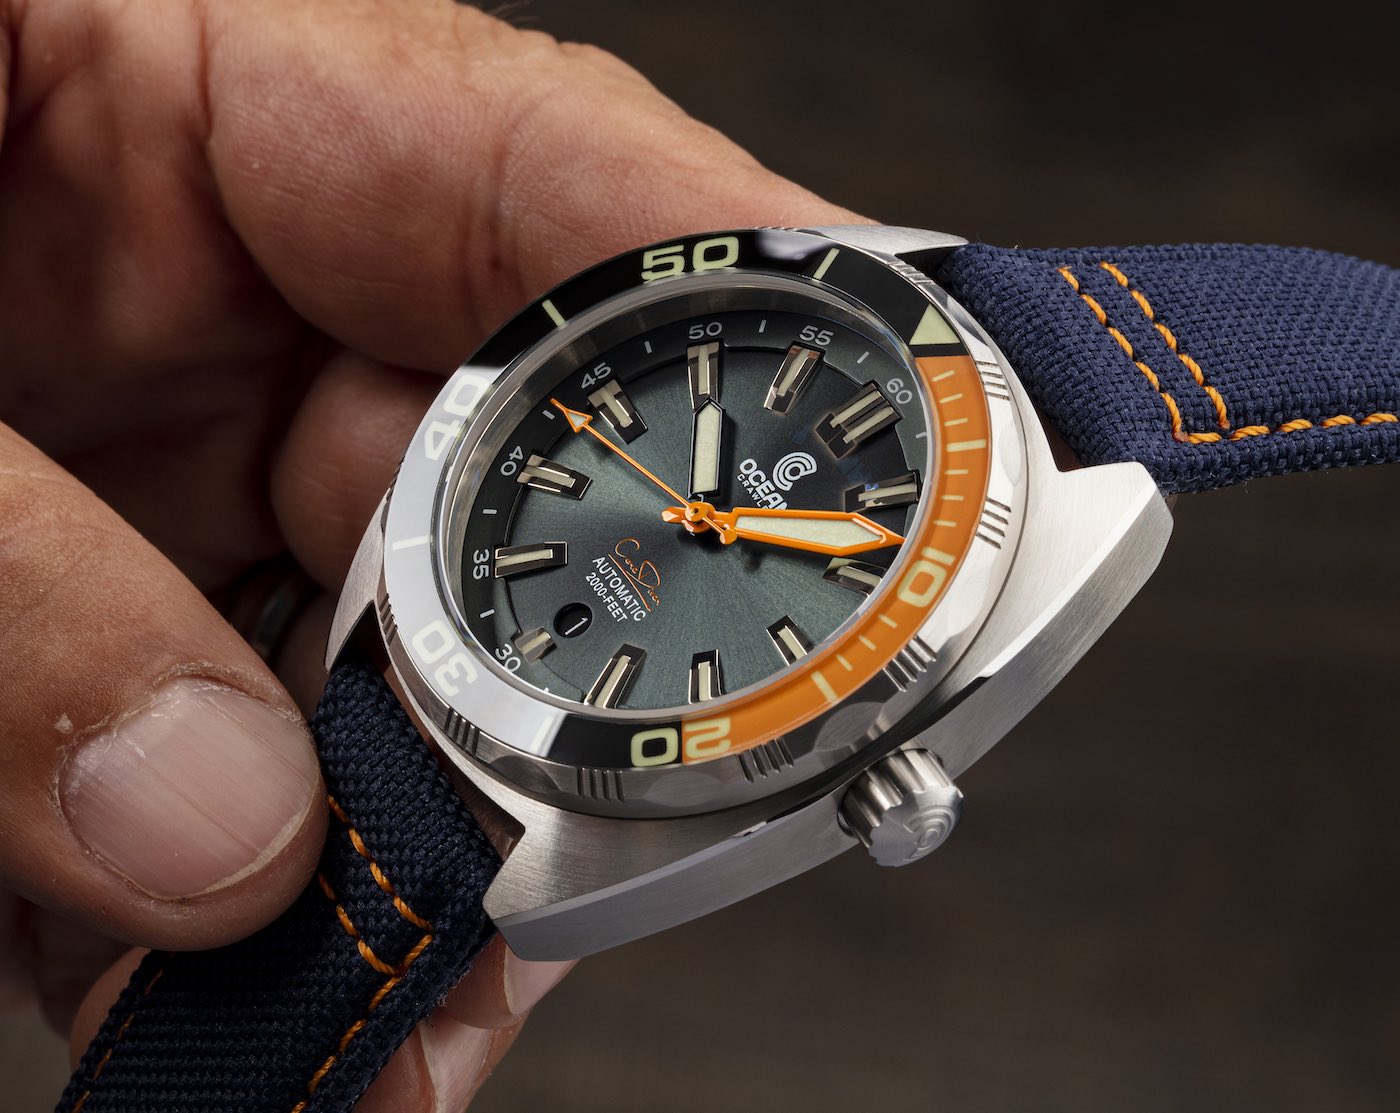 Ocean Crawler Core Diver Watch Reissued In Four Colors